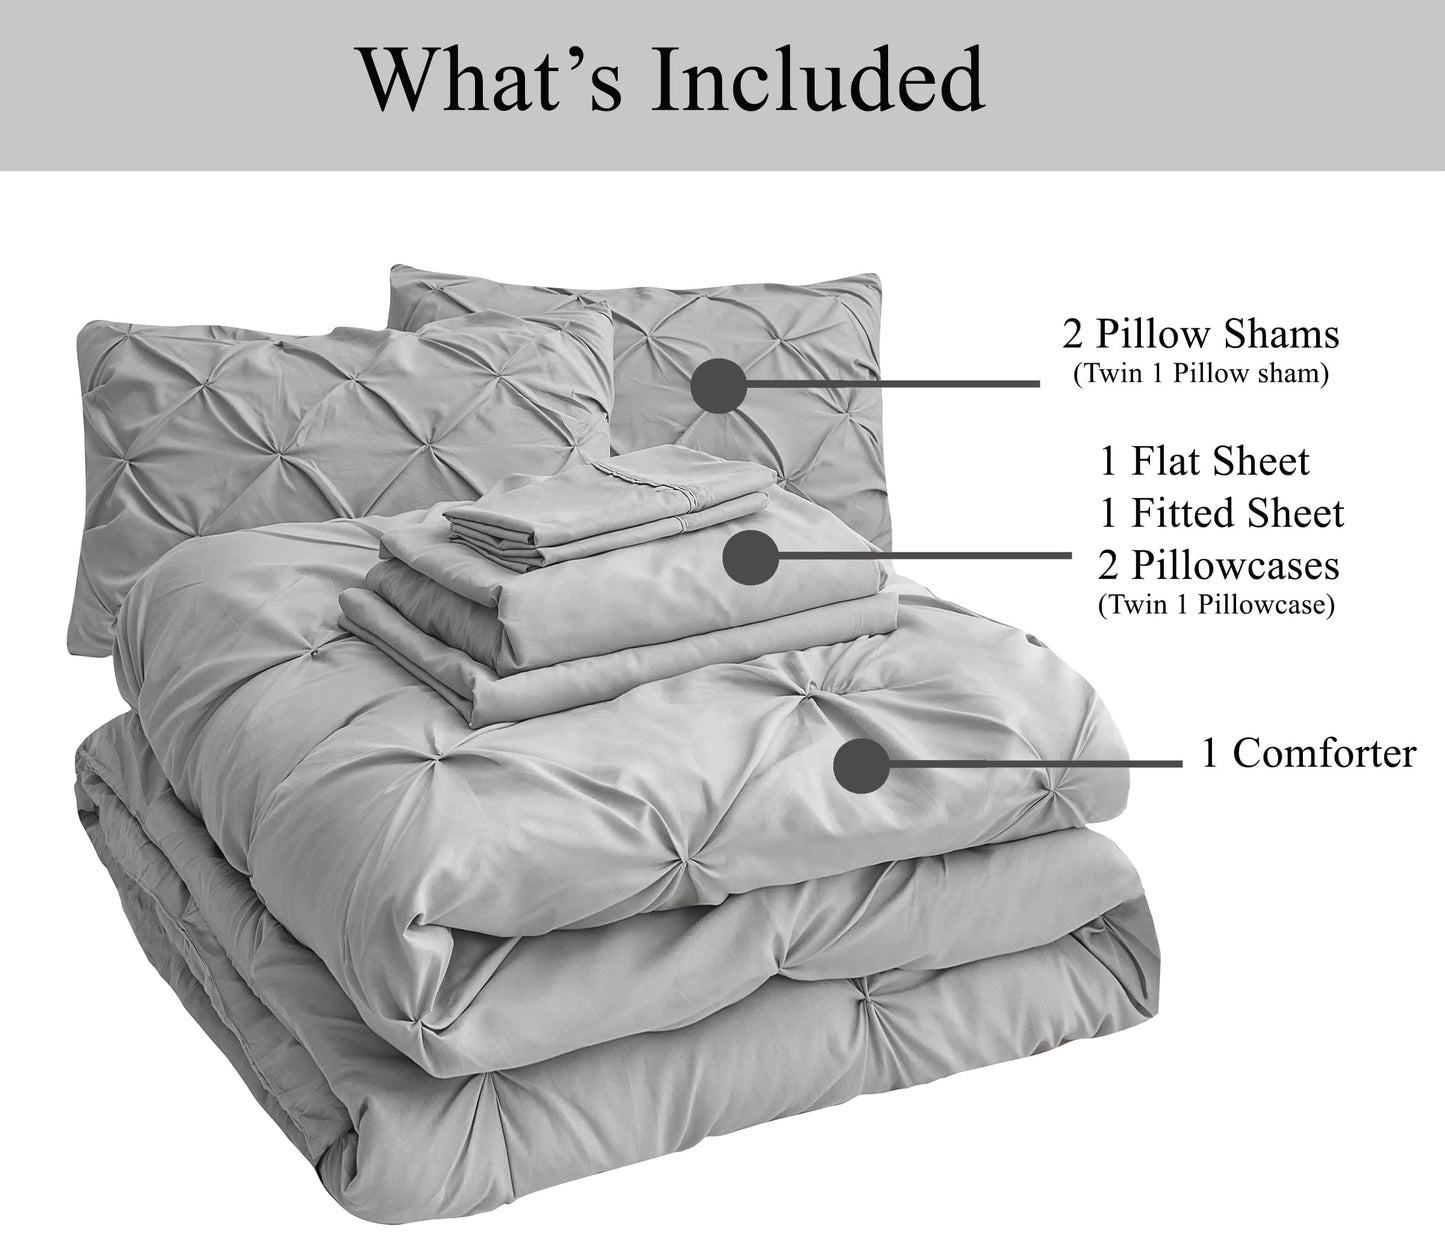 LANE LINEN Bedding Comforter Set for Split King Mattress, Soft 8 Piece Split King Bed in a Bag with 1 King Comforter, 1 King Size Flat Sheet, 2 Twin XL Fitted Sheets, 2 Pillowcases & 2 Shams - Silver